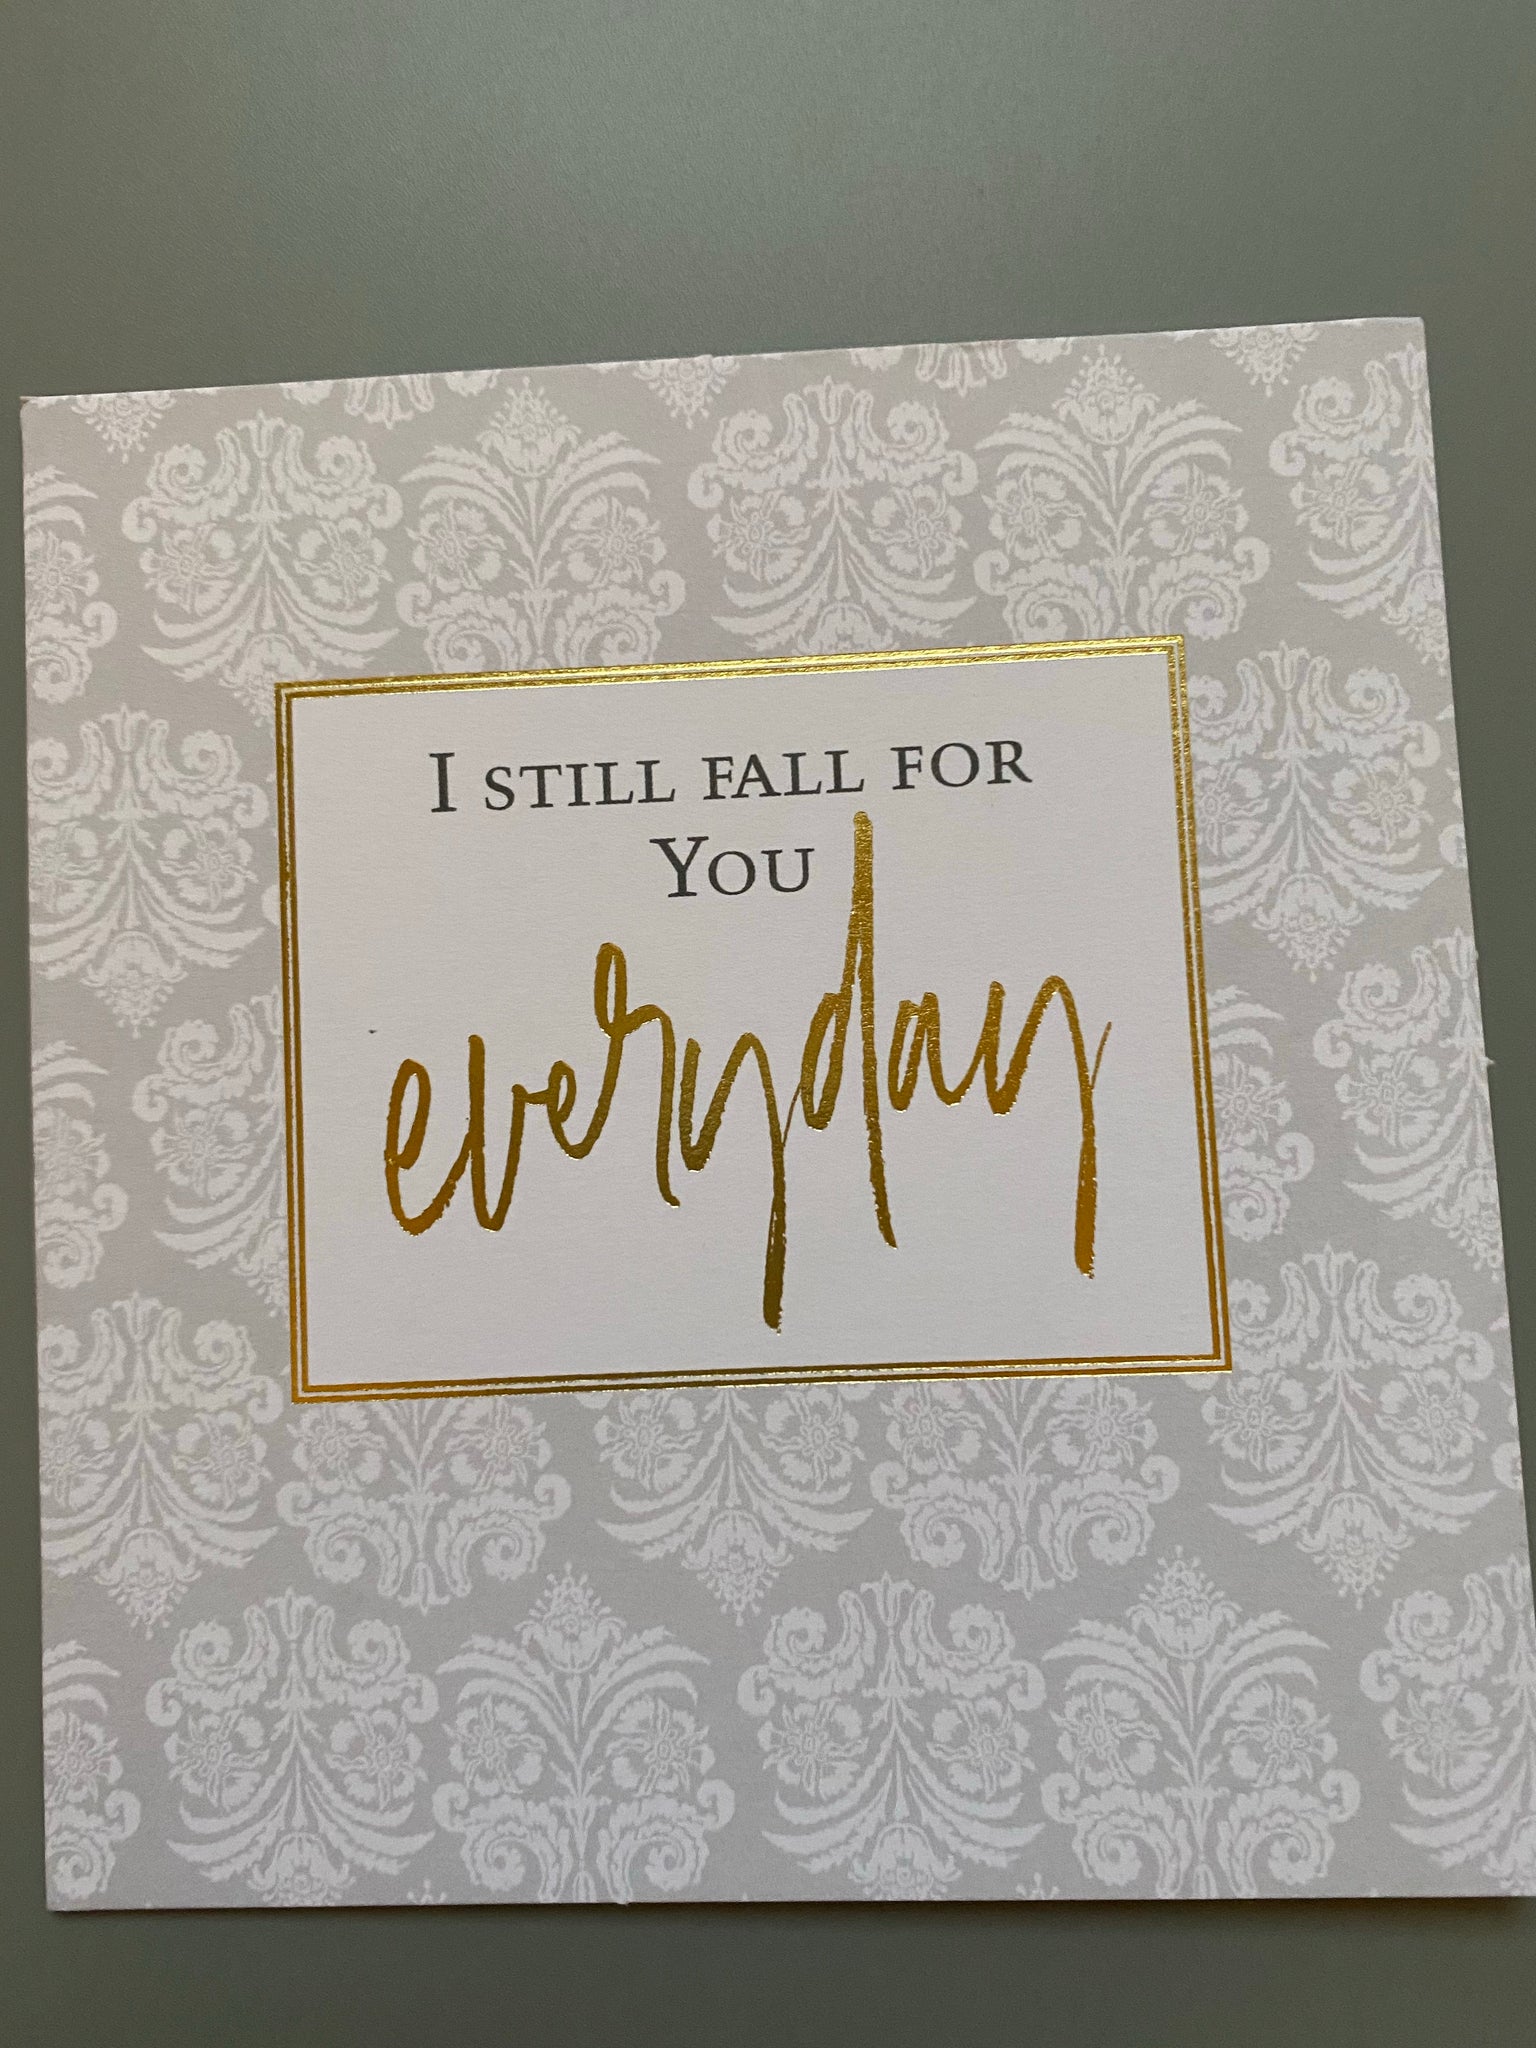 I still fall for you card